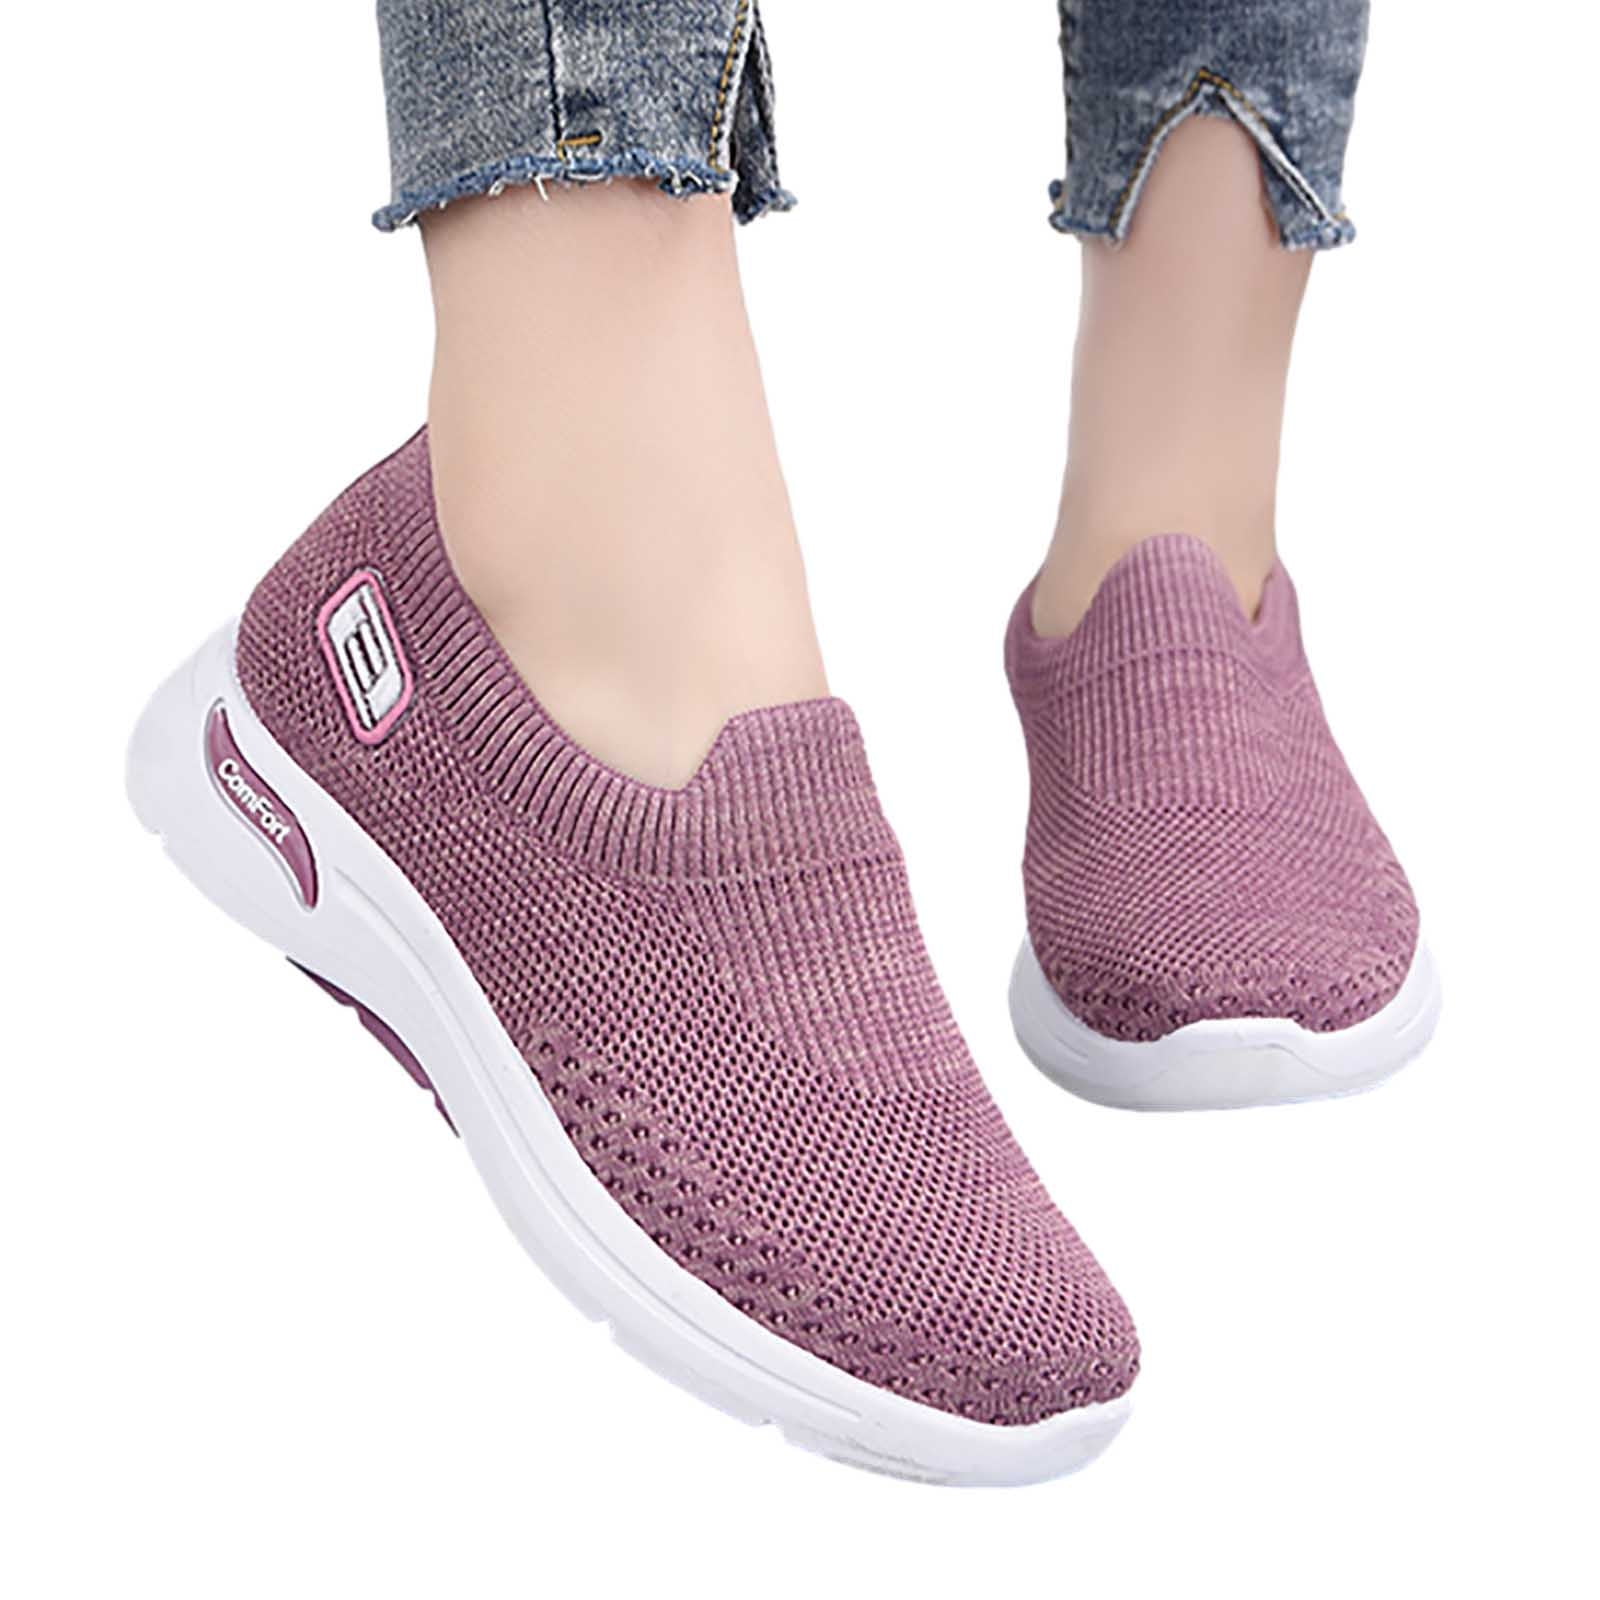 Buy Casual shoes for women SL 198 - Shoes for Women | Relaxo